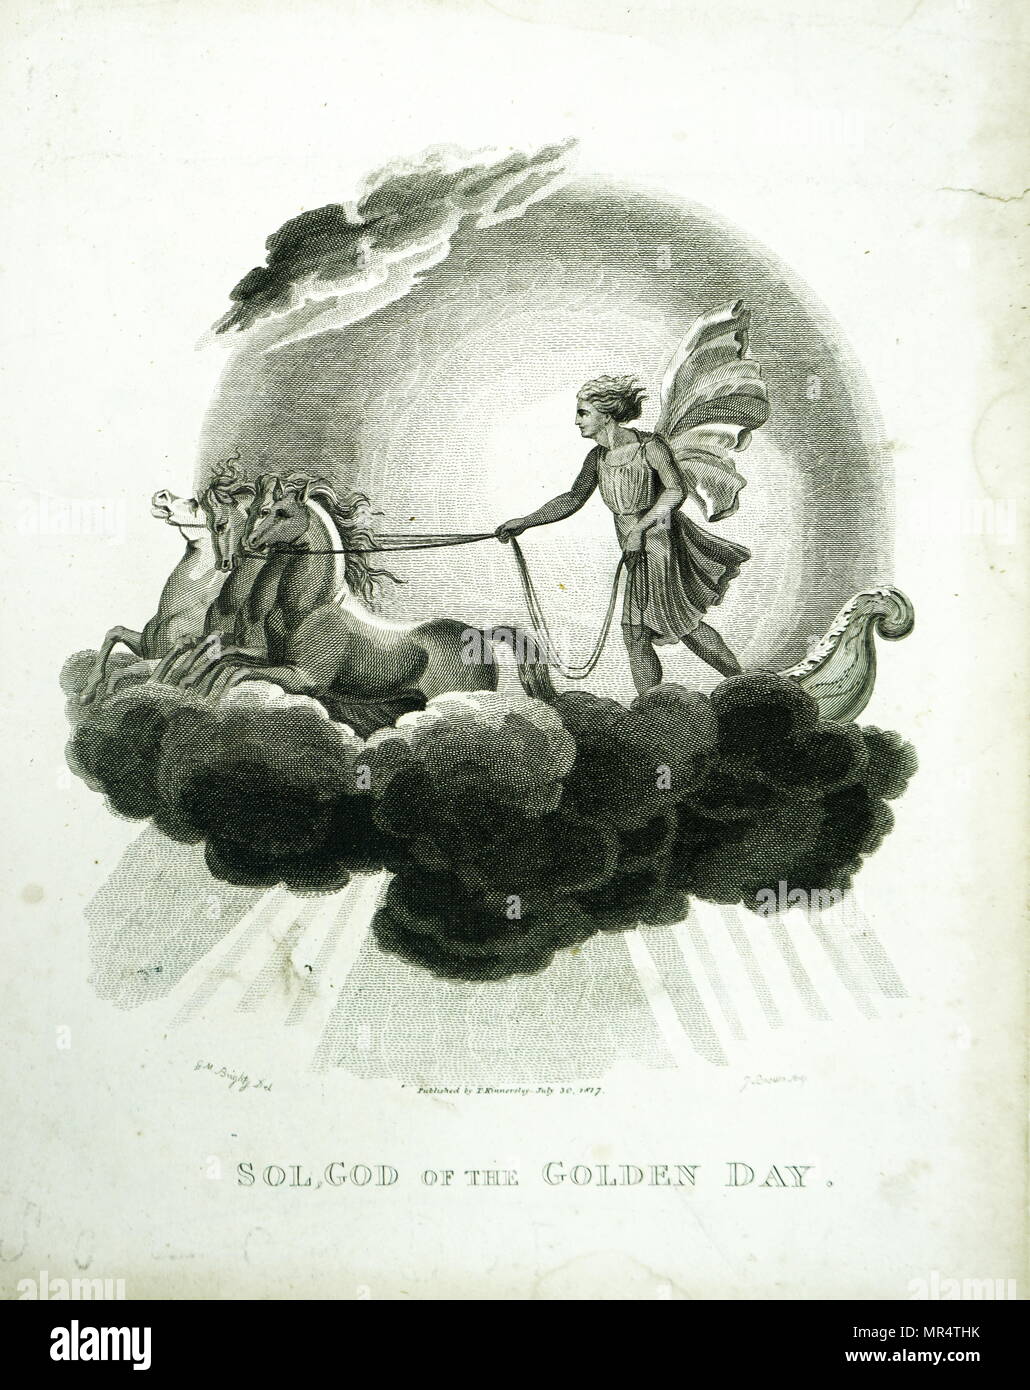 Engraving depicting Helios, the Sun God in Ancient Greek mythology, riding his chariot. Dated 19th century Stock Photo